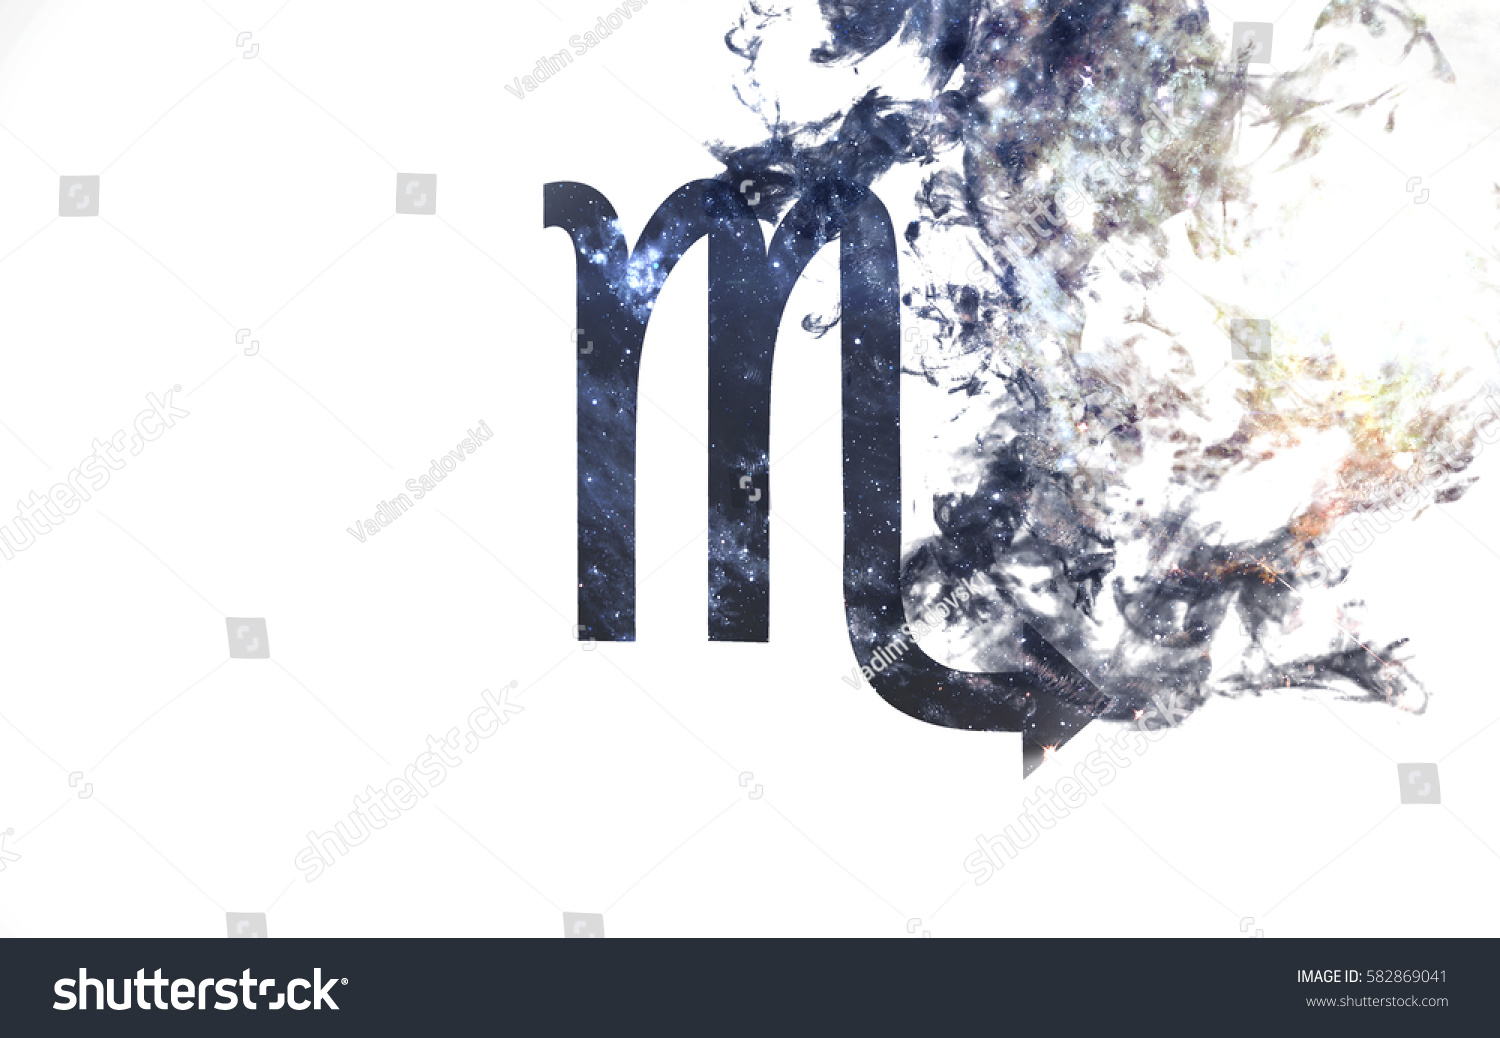 Zodiac sign - Scorpio. Dust of the universe, minimalistic art. Elements of this image furnished by NASA #582869041